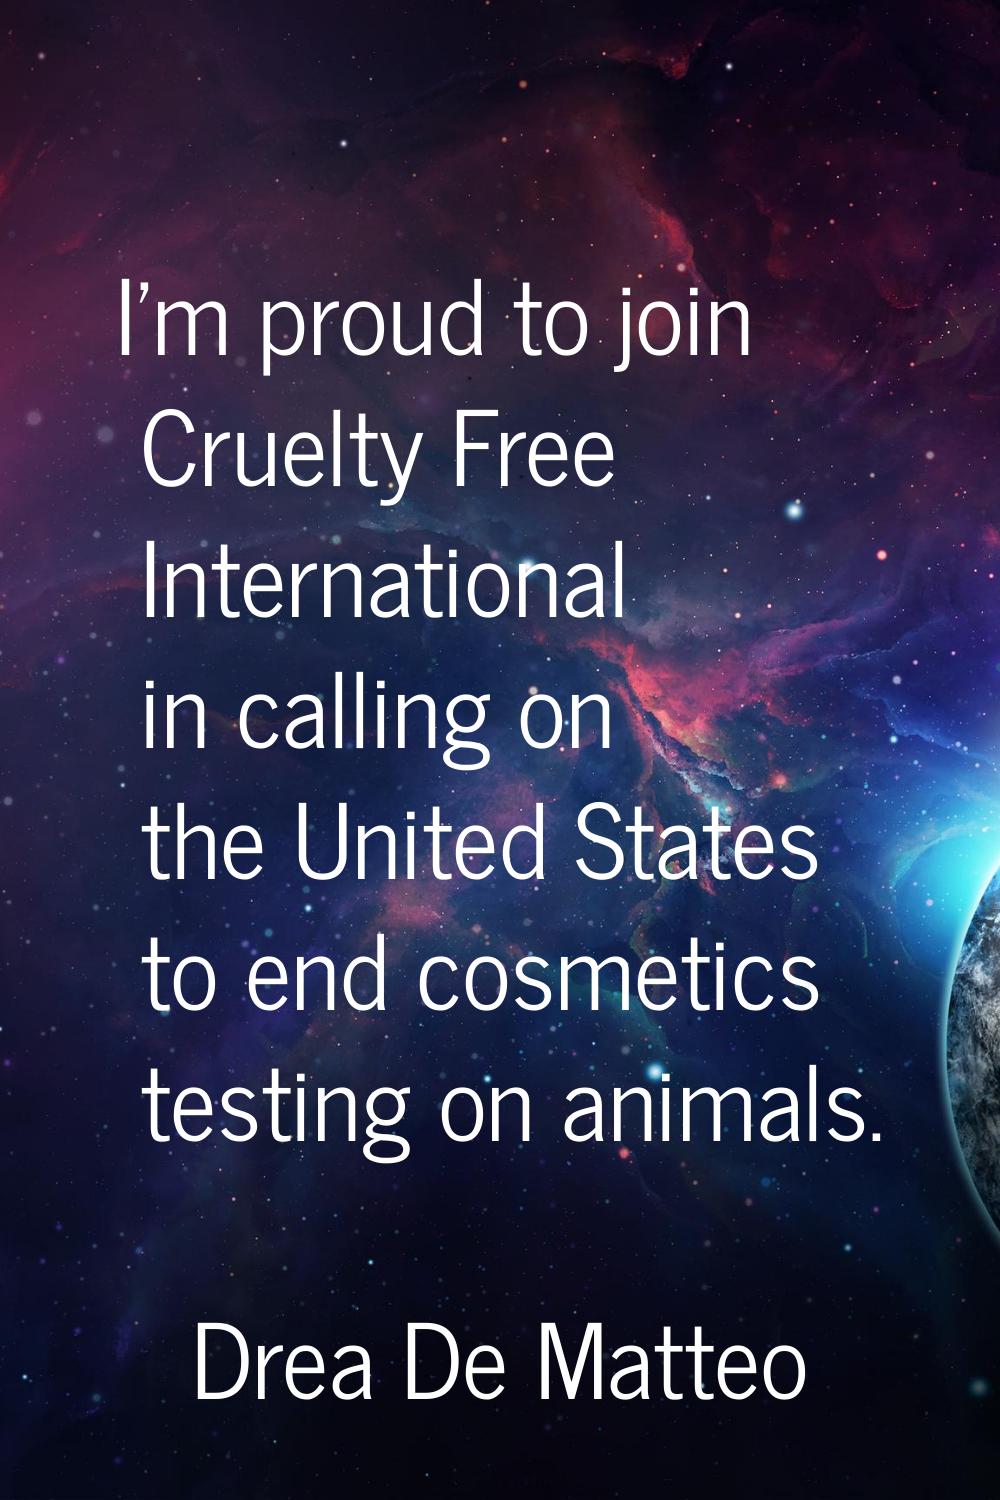 I'm proud to join Cruelty Free International in calling on the United States to end cosmetics testi